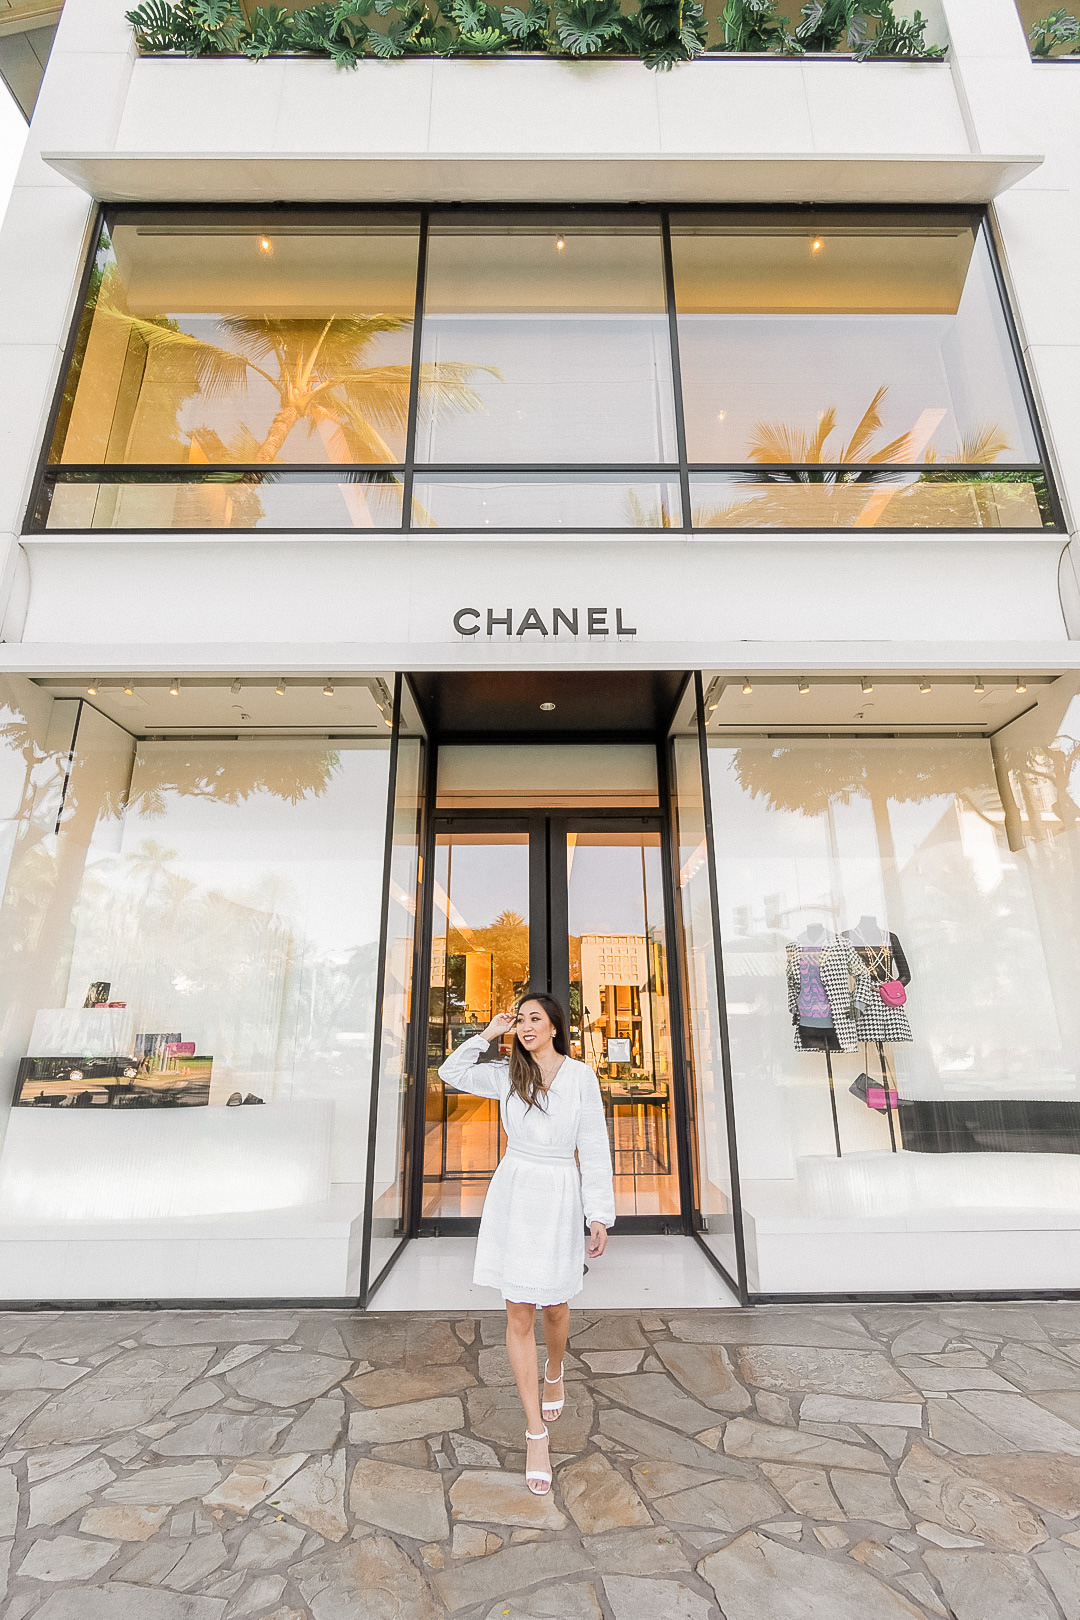 Chanel Hawaii Shopping Guide (Special Hawaii Pricing) - The Luxury Lowdown